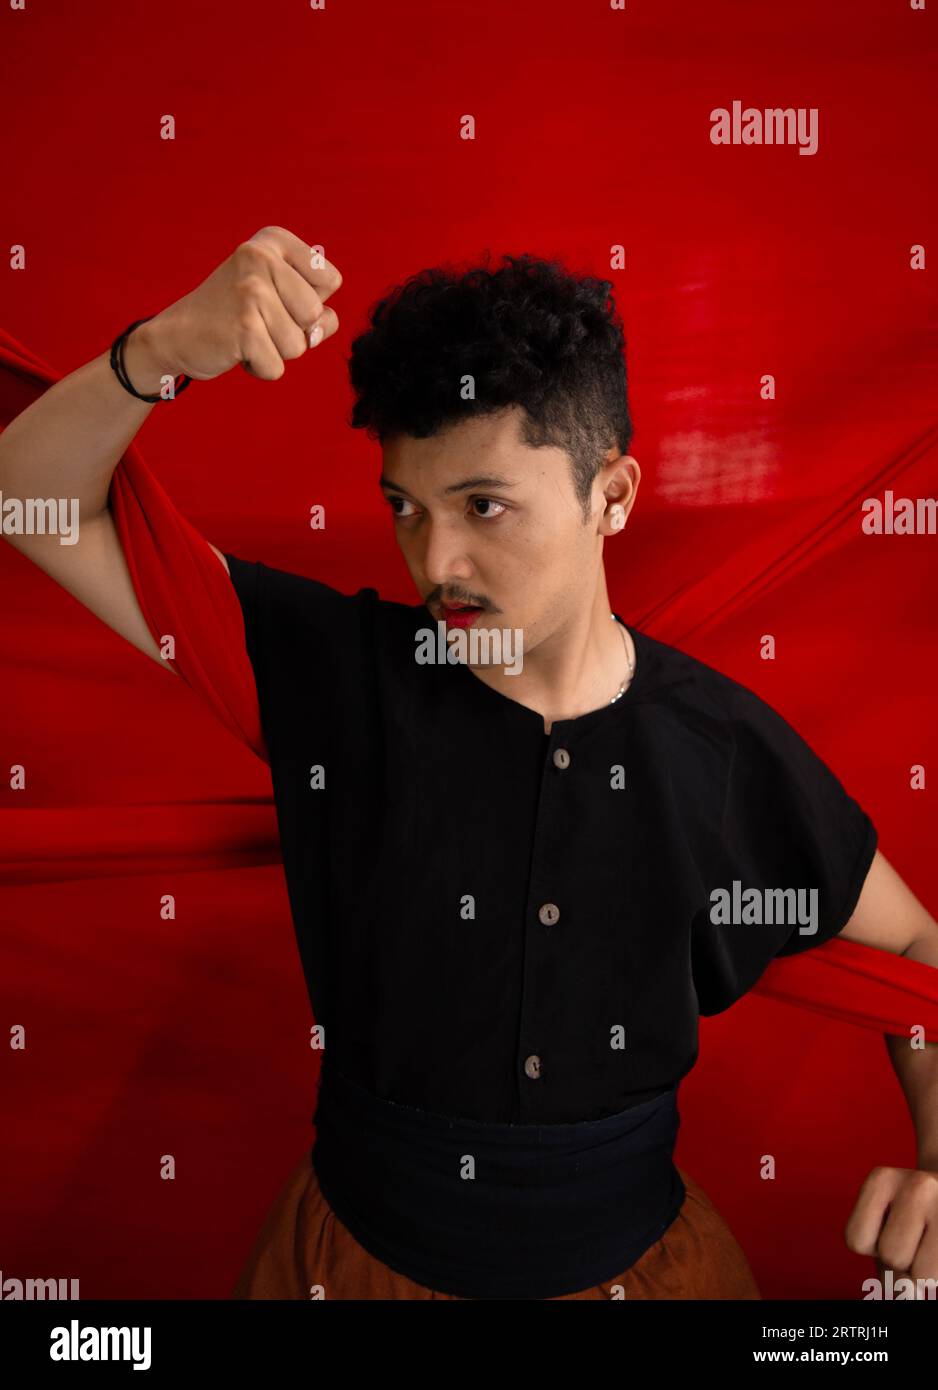 an Asian man holding a red cloth in his arms with a bold expression against a red background during the day Stock Photo